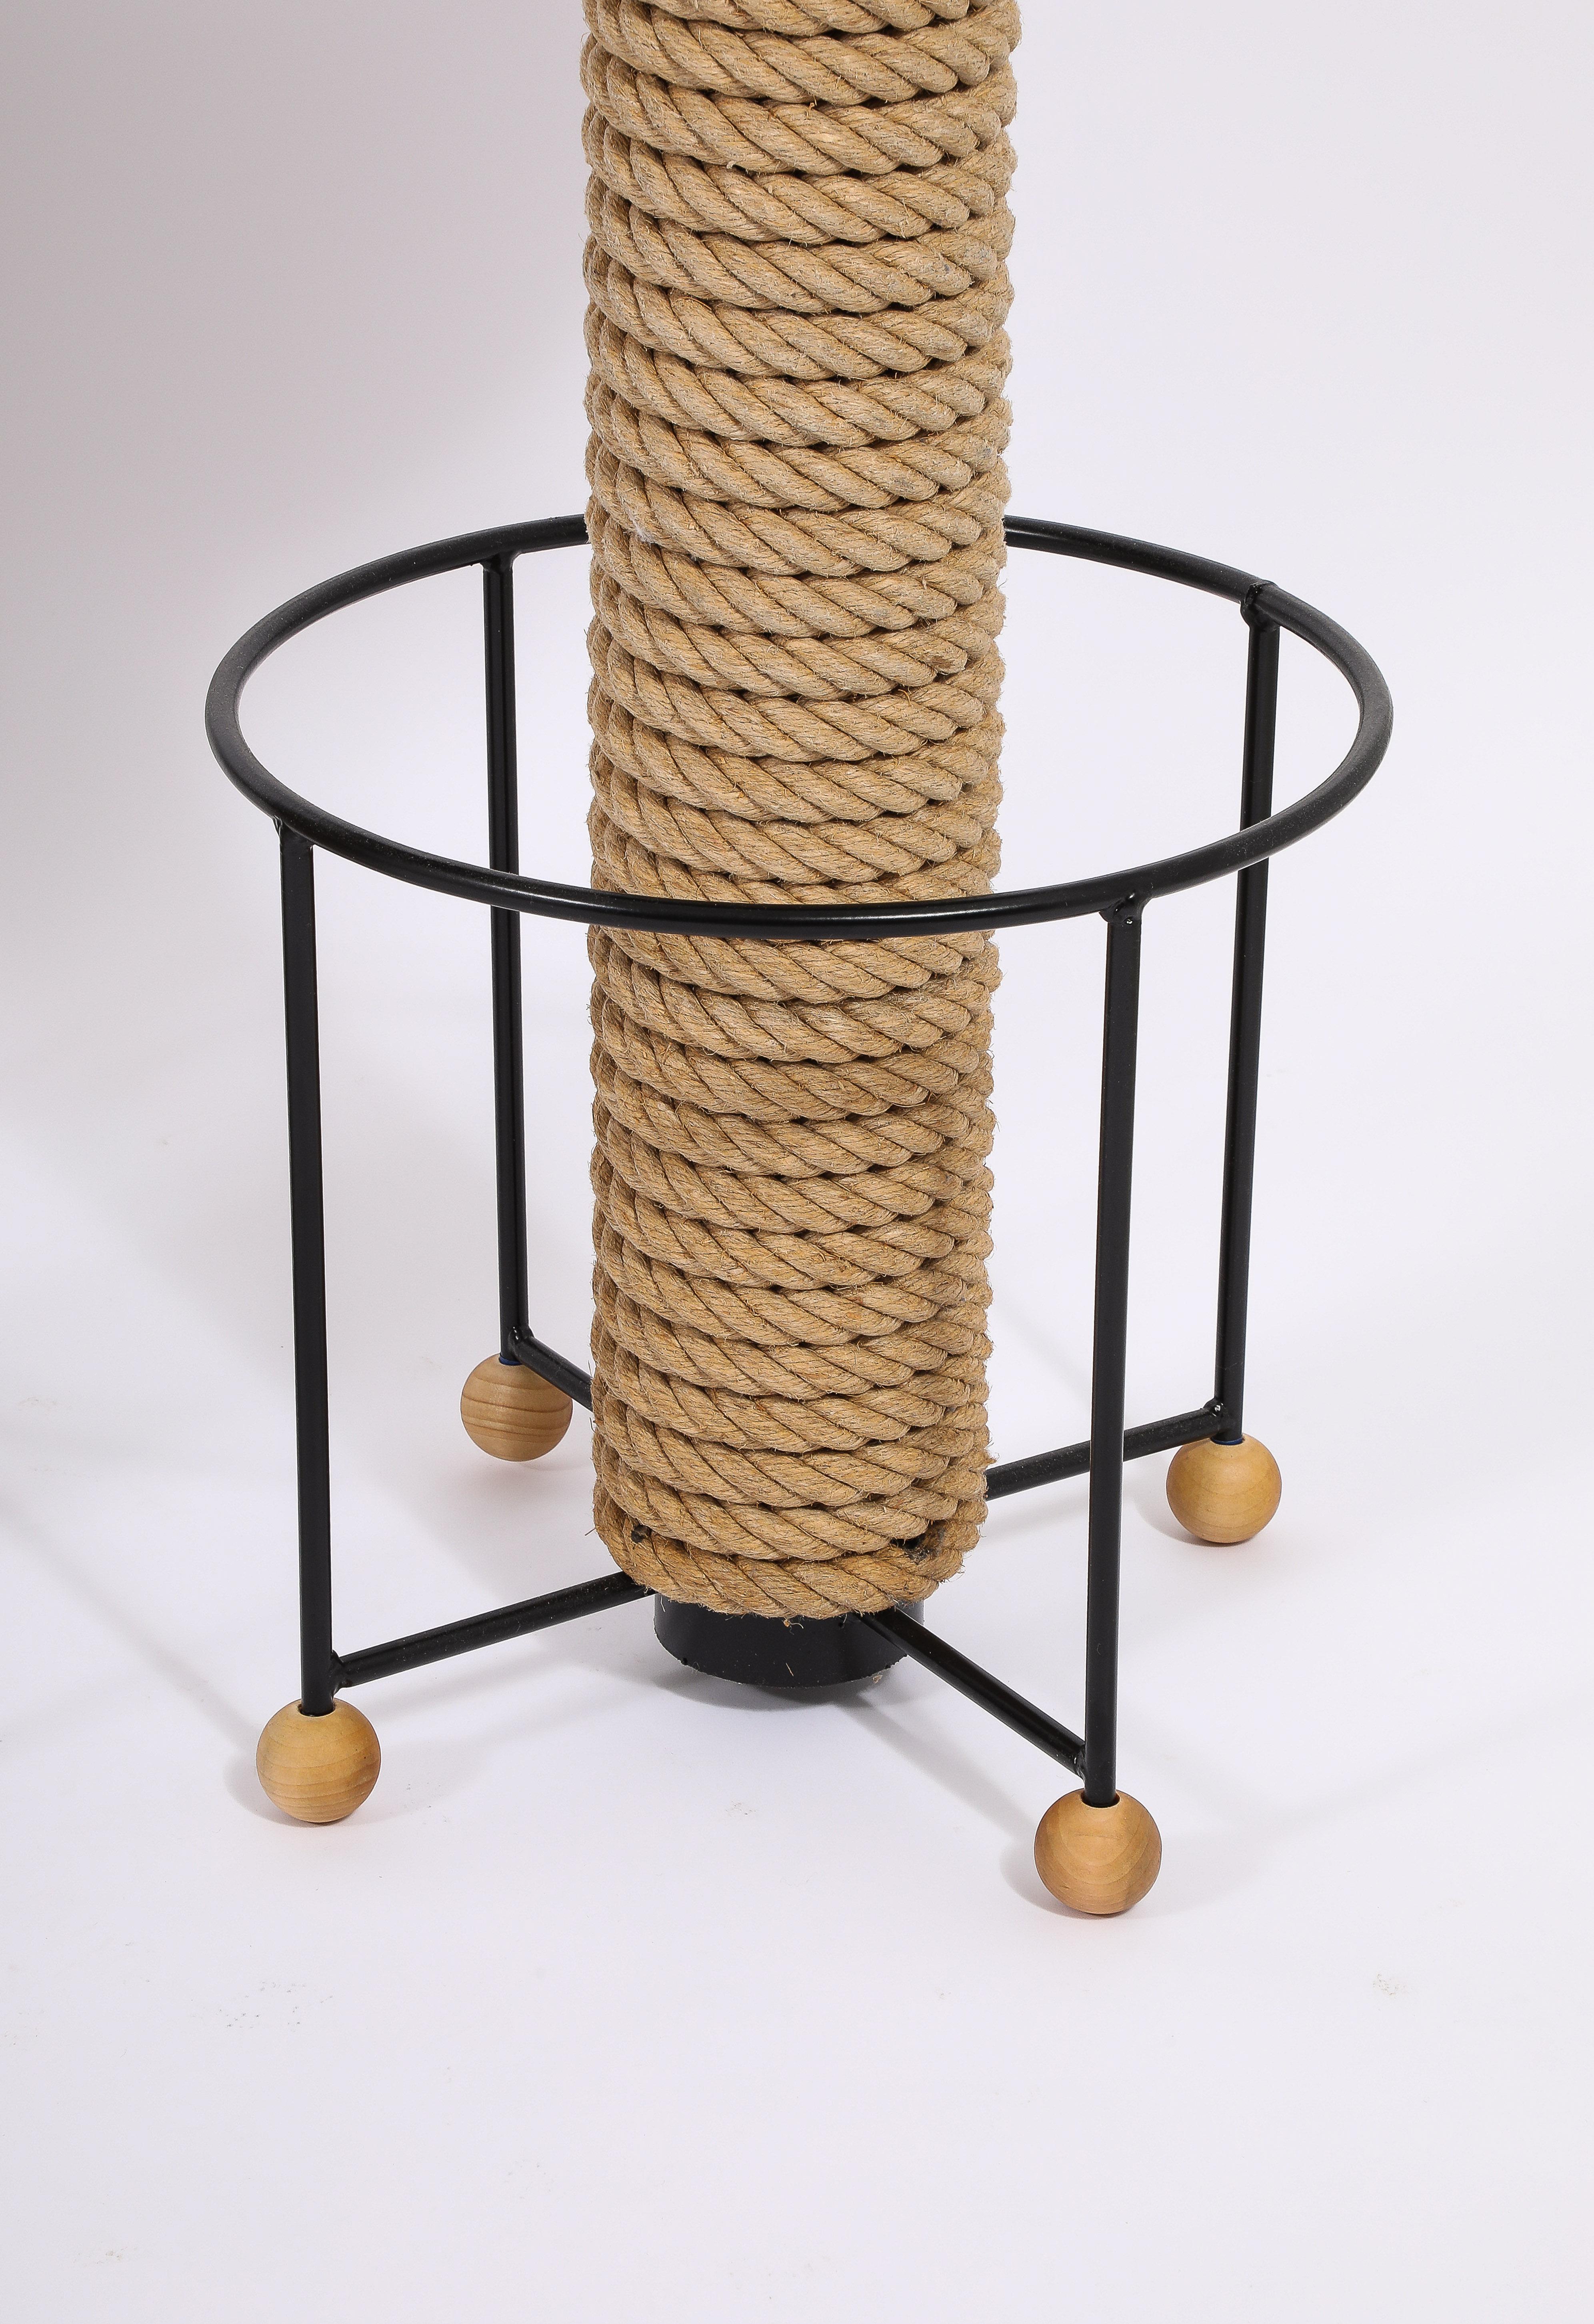 Audoux Minet Rope Barstools, France 1950's For Sale 5